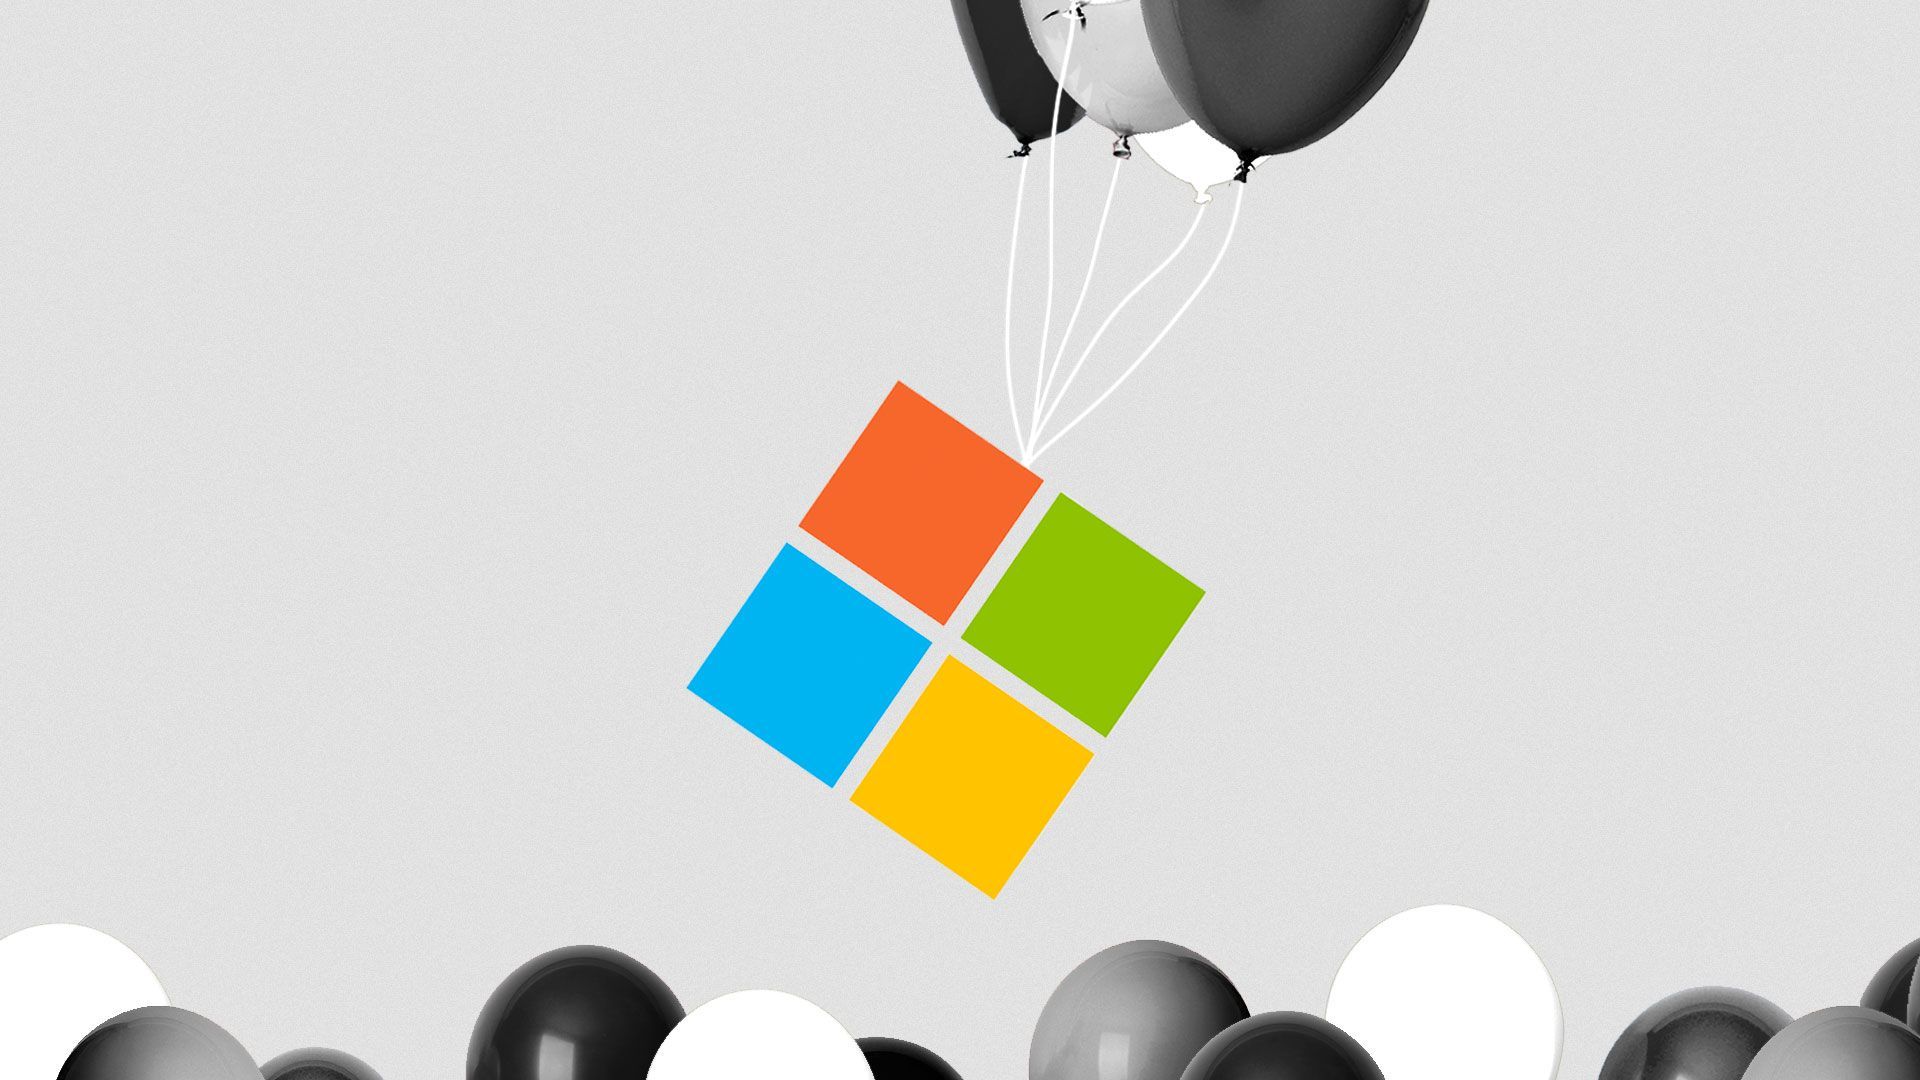 Illustration of balloons carrying the Microsoft logo up and away over other balloons